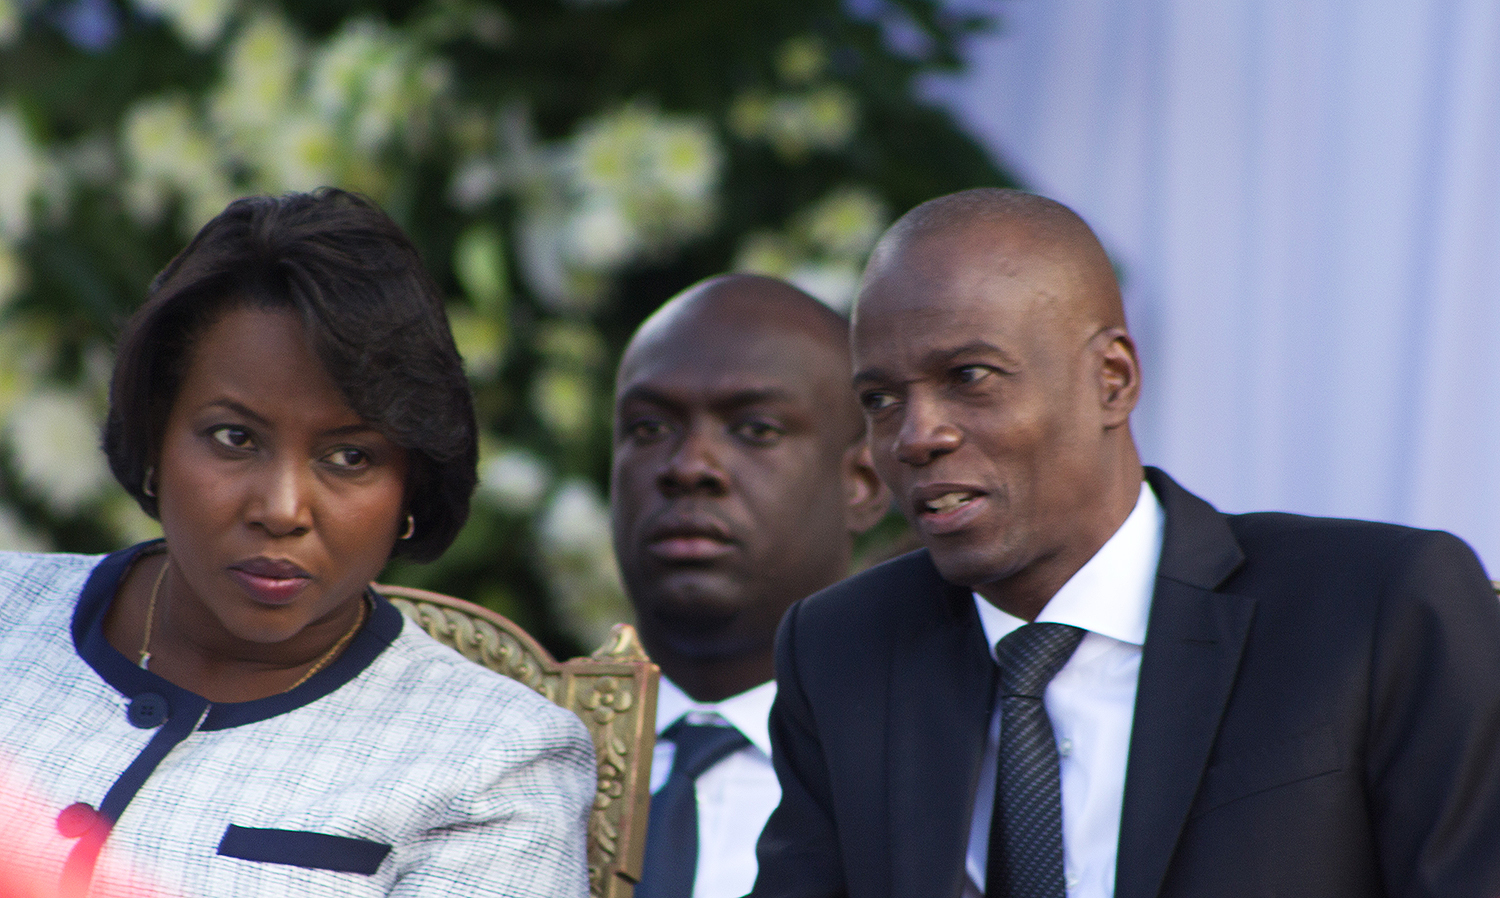 Photo of former first lady and president Jovenel Moïse in Port-au-Prince, Haiti, on March 11, 2017.